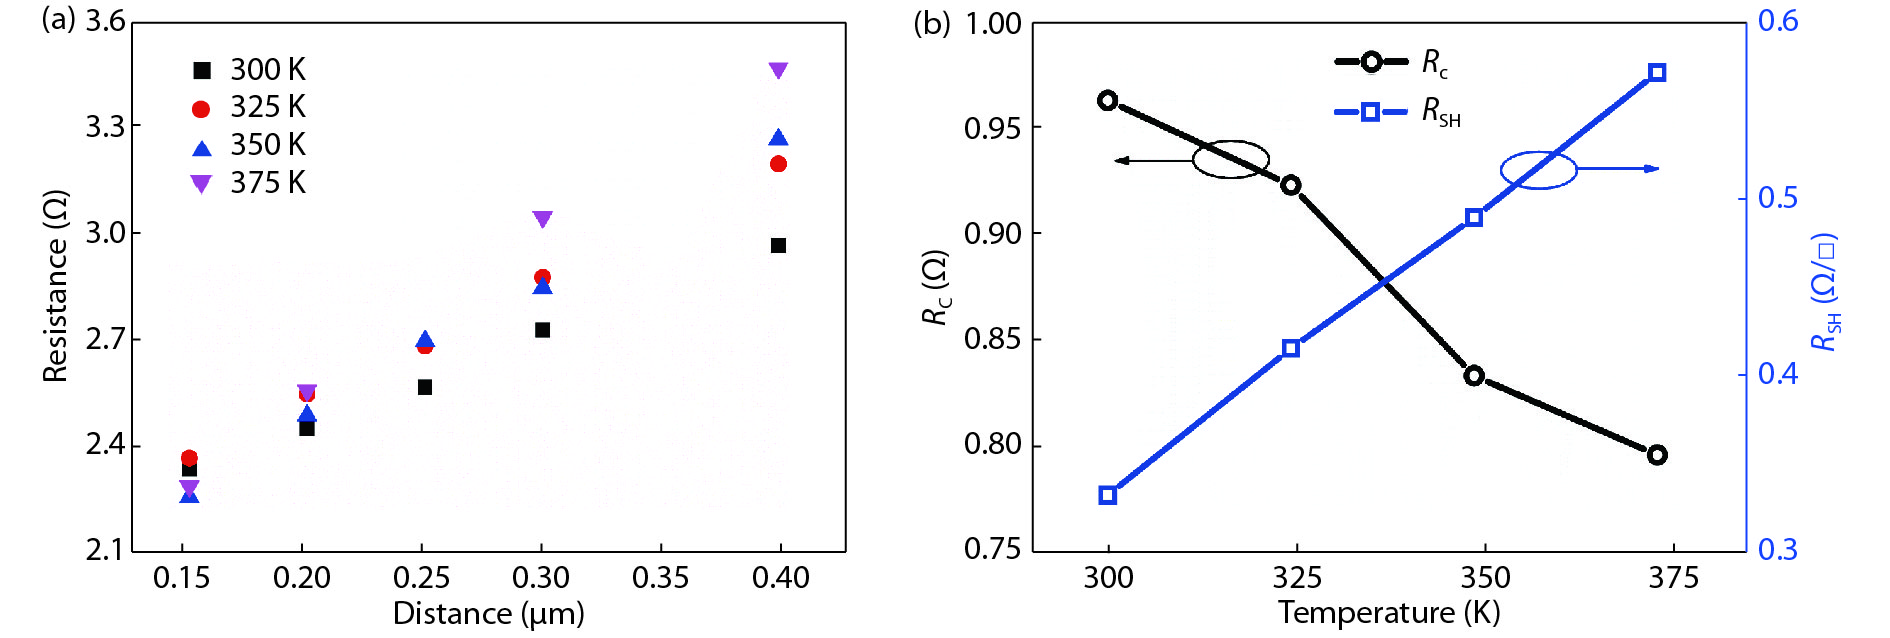 (Color online) (a) Resistance of Mg/Au-β-Ga2O3 structure with two adjacent ohmic contacts versus the distance at different temperatures. (b) Contact resistance and sheet resistance of the ohmic contact Mg/Au-β-Ga2O3 versus measuring temperatures.